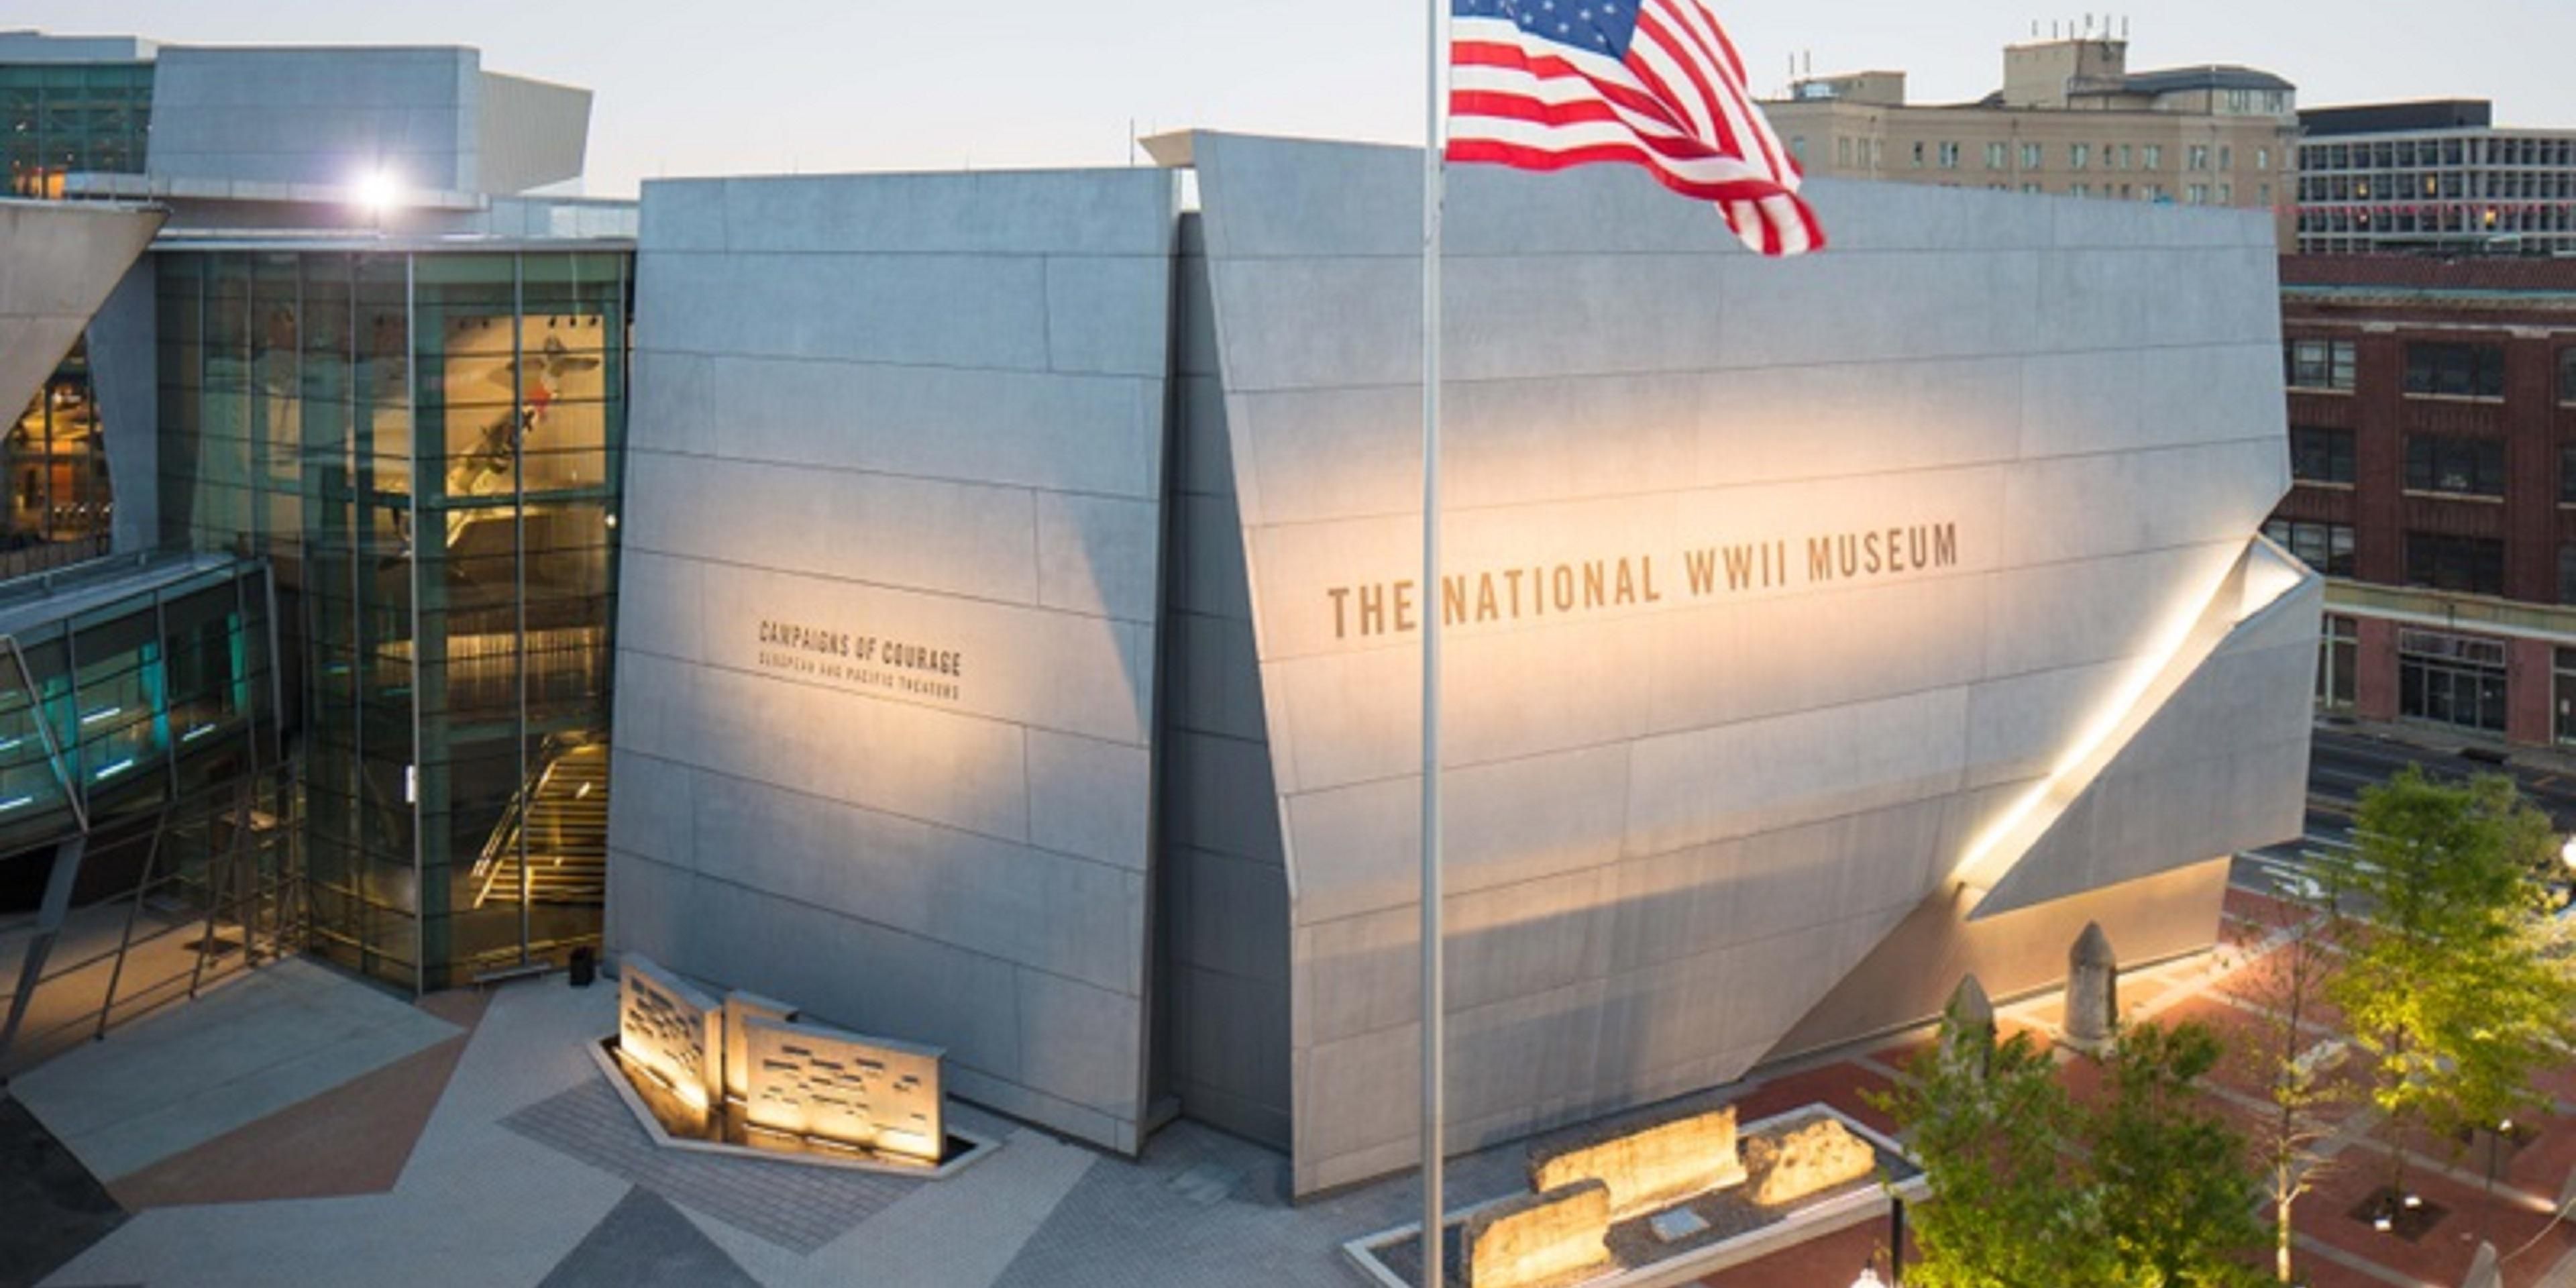 Located only one block away and named by USA Today as a top-ranking Best Place to Learn US Military History, and designated by Congress as America’s official museum about World War II, The National WWII Museum features a rich collection of artifacts that bring history to life.